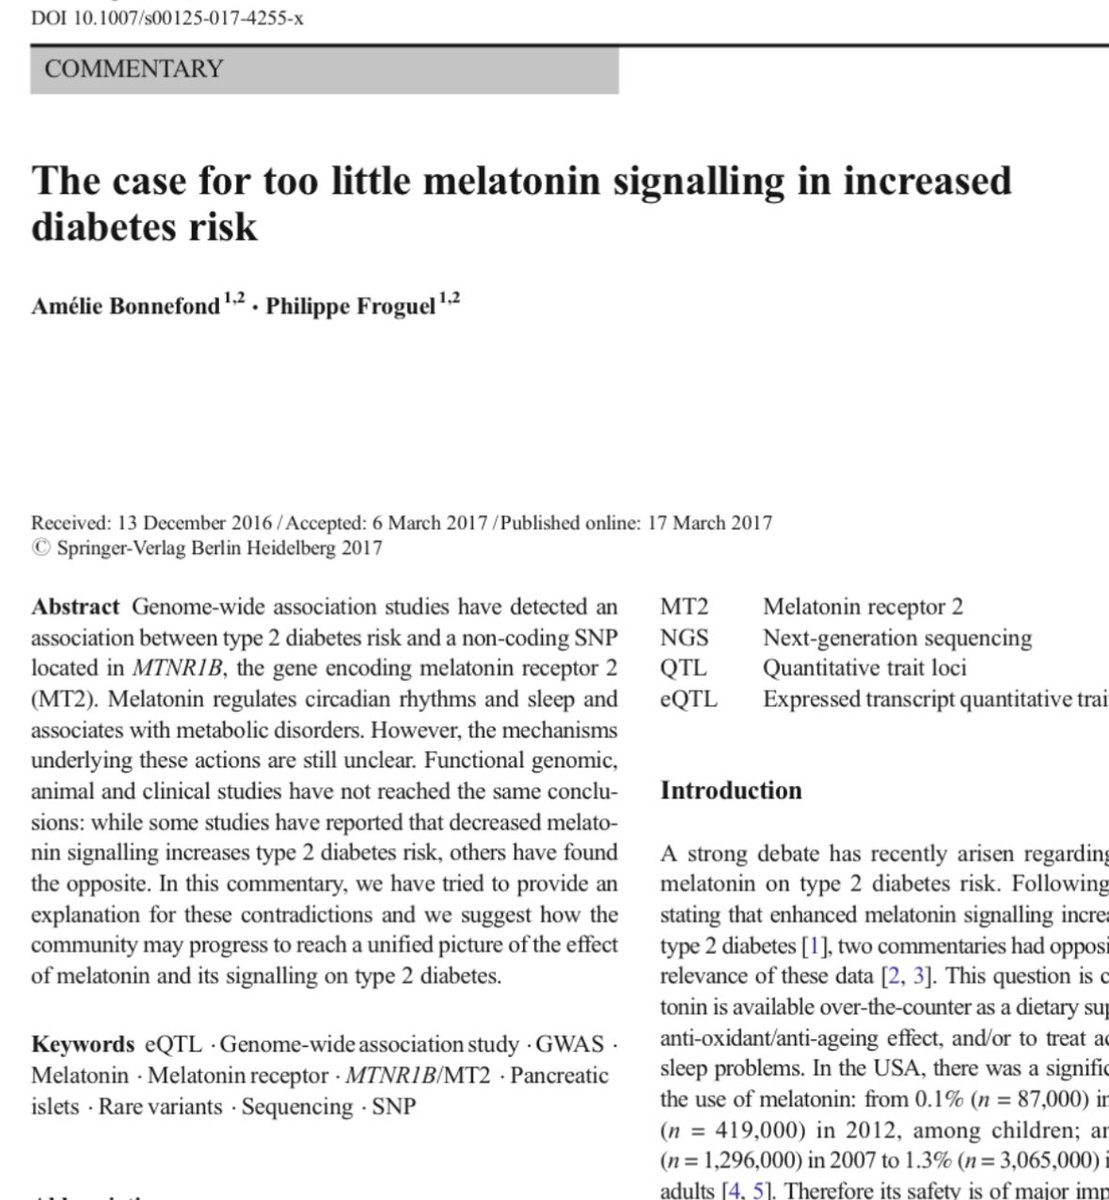 8 years ago we contributed to a strong scientific controversy in CellMetab and other journals on the impact of melatonin on diabetes and complications risk. From our and other data we denied Swedish colleagues claims that melatonin supplements could be harmful. This Lancet paper…